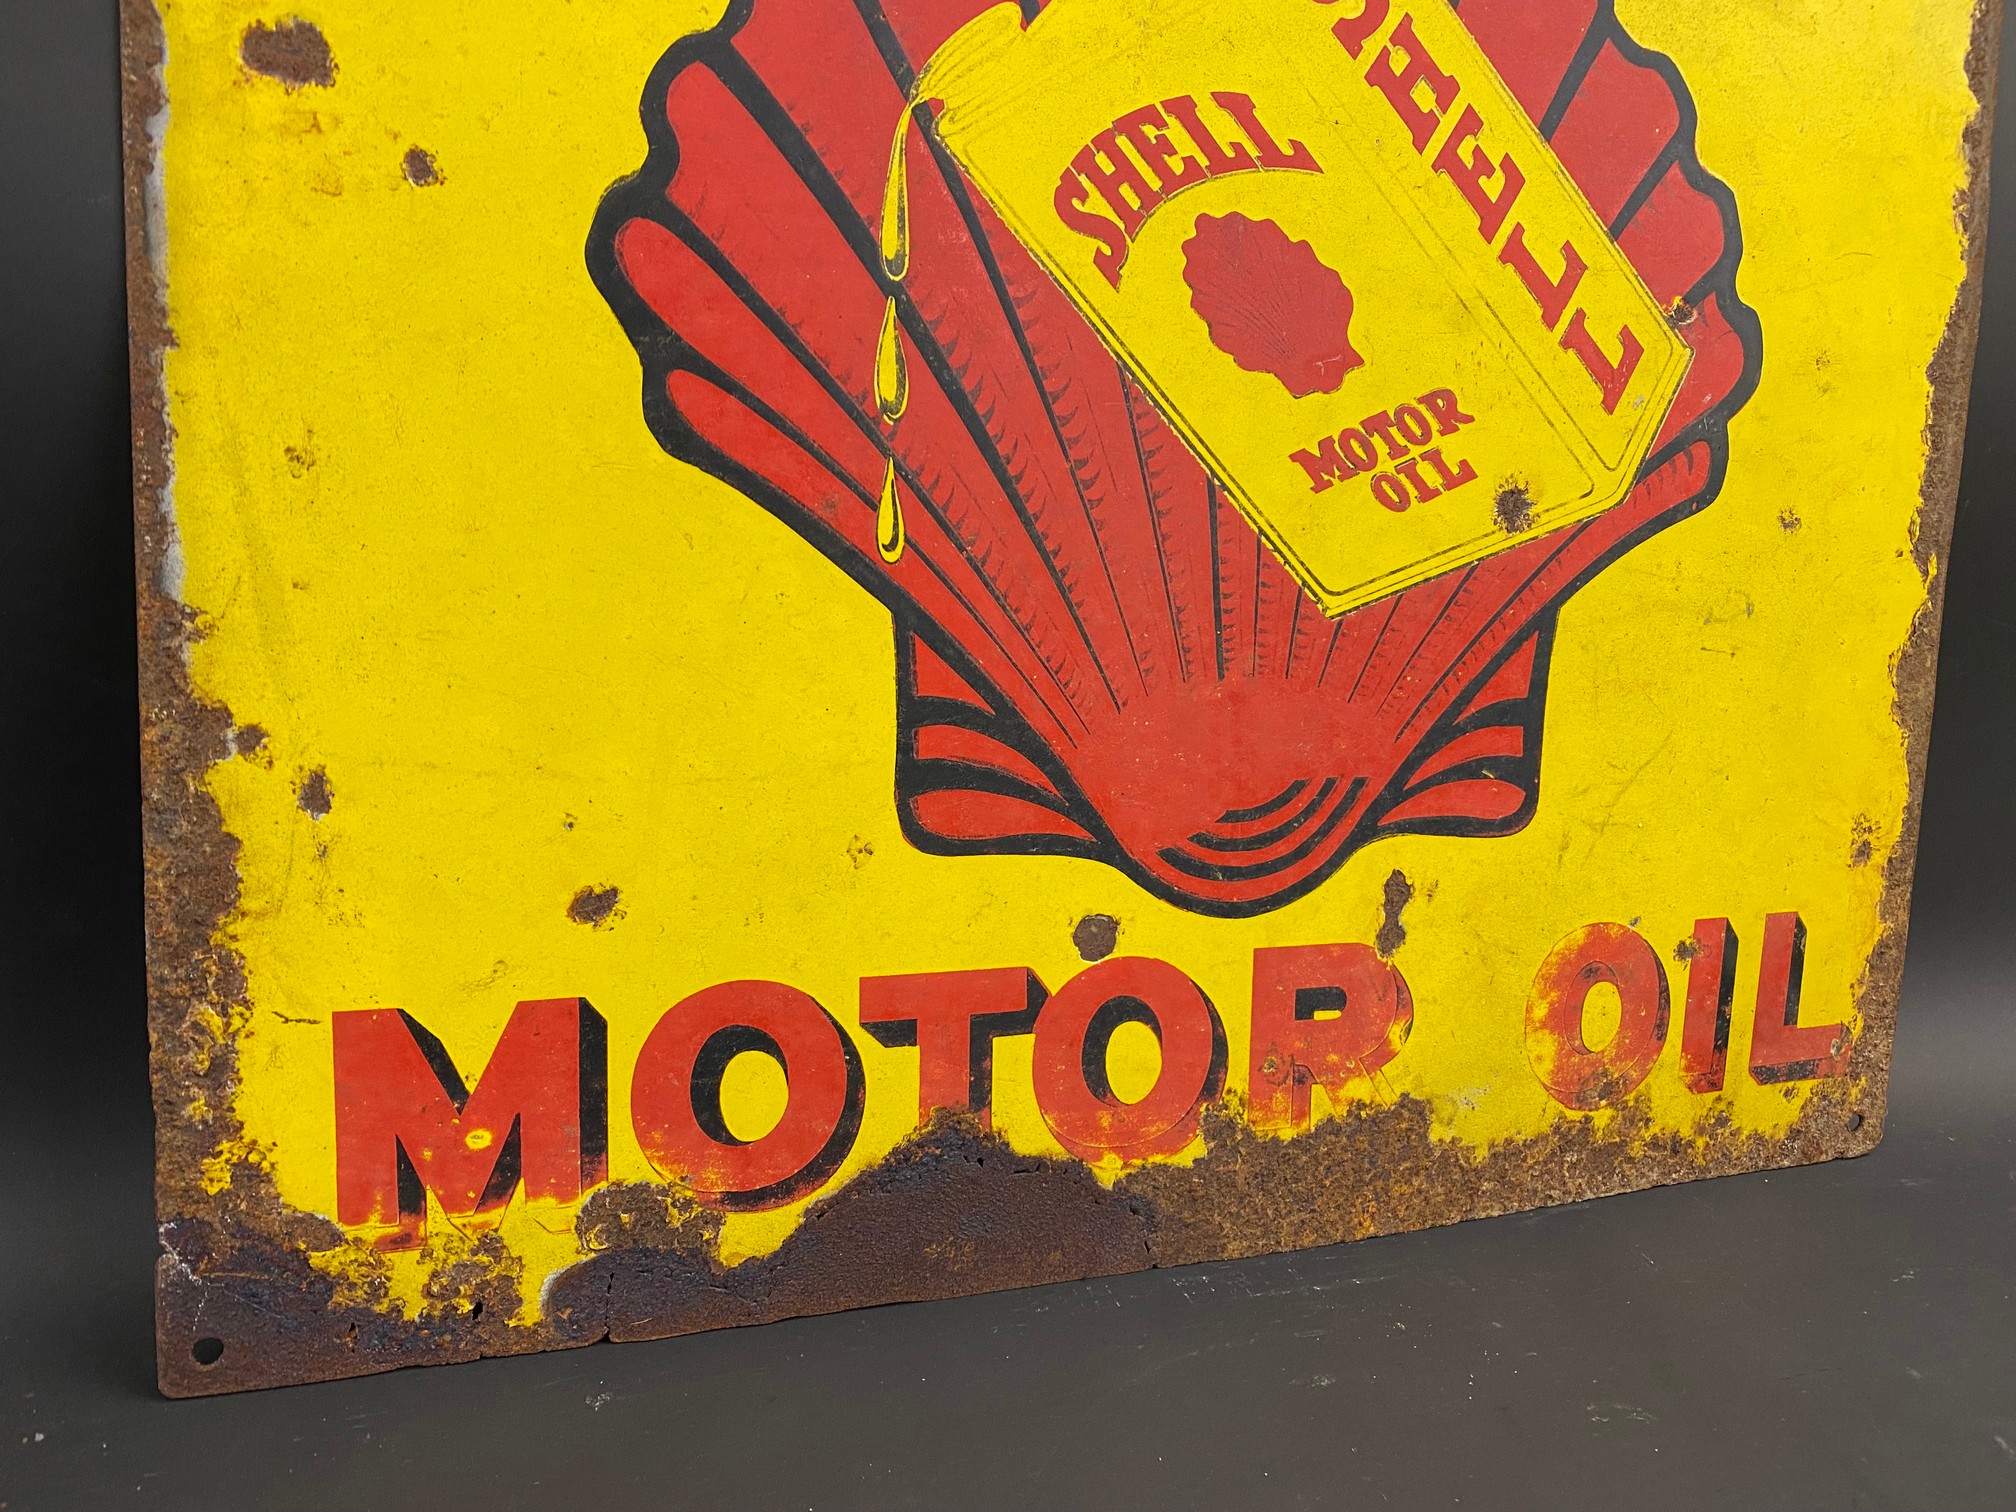 A Shell Motor Oil enamel sign with central dripping can image against a clam motif, 18 x 18". - Image 4 of 5